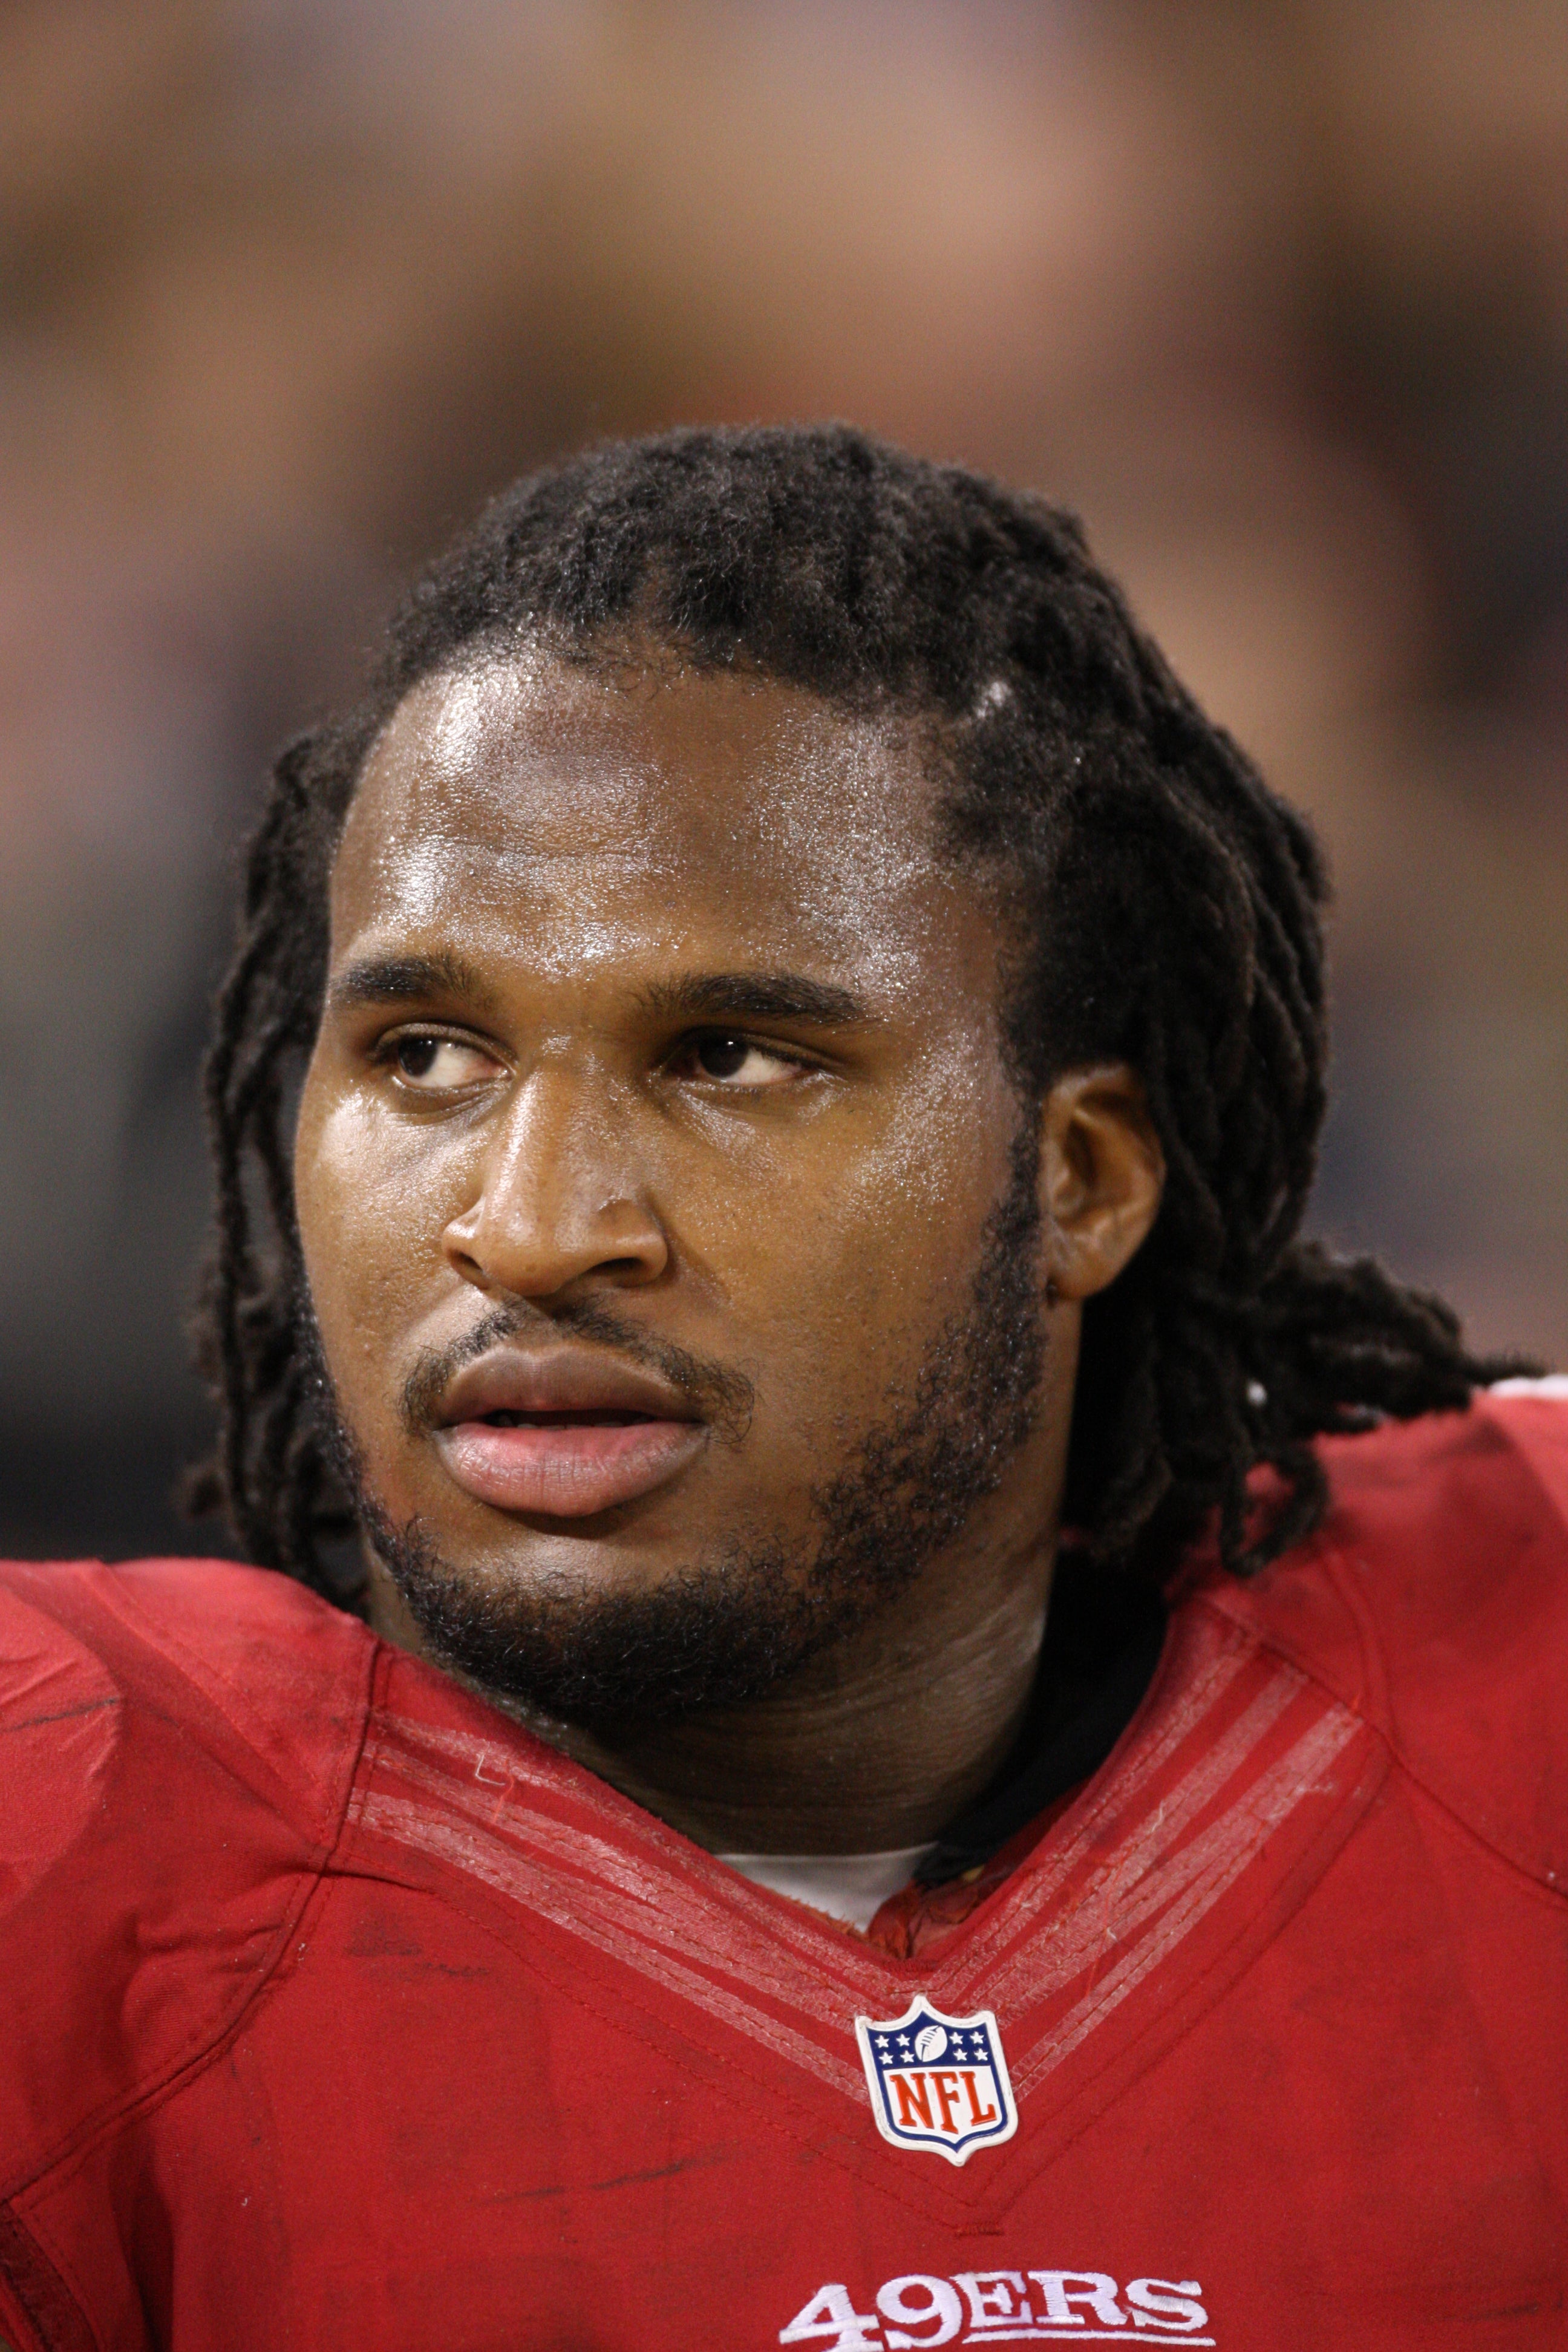 Disturbing Video Shows Former NFL Star Ray McDonald Terrorizing His Child's Mother As She Holds Their Baby
